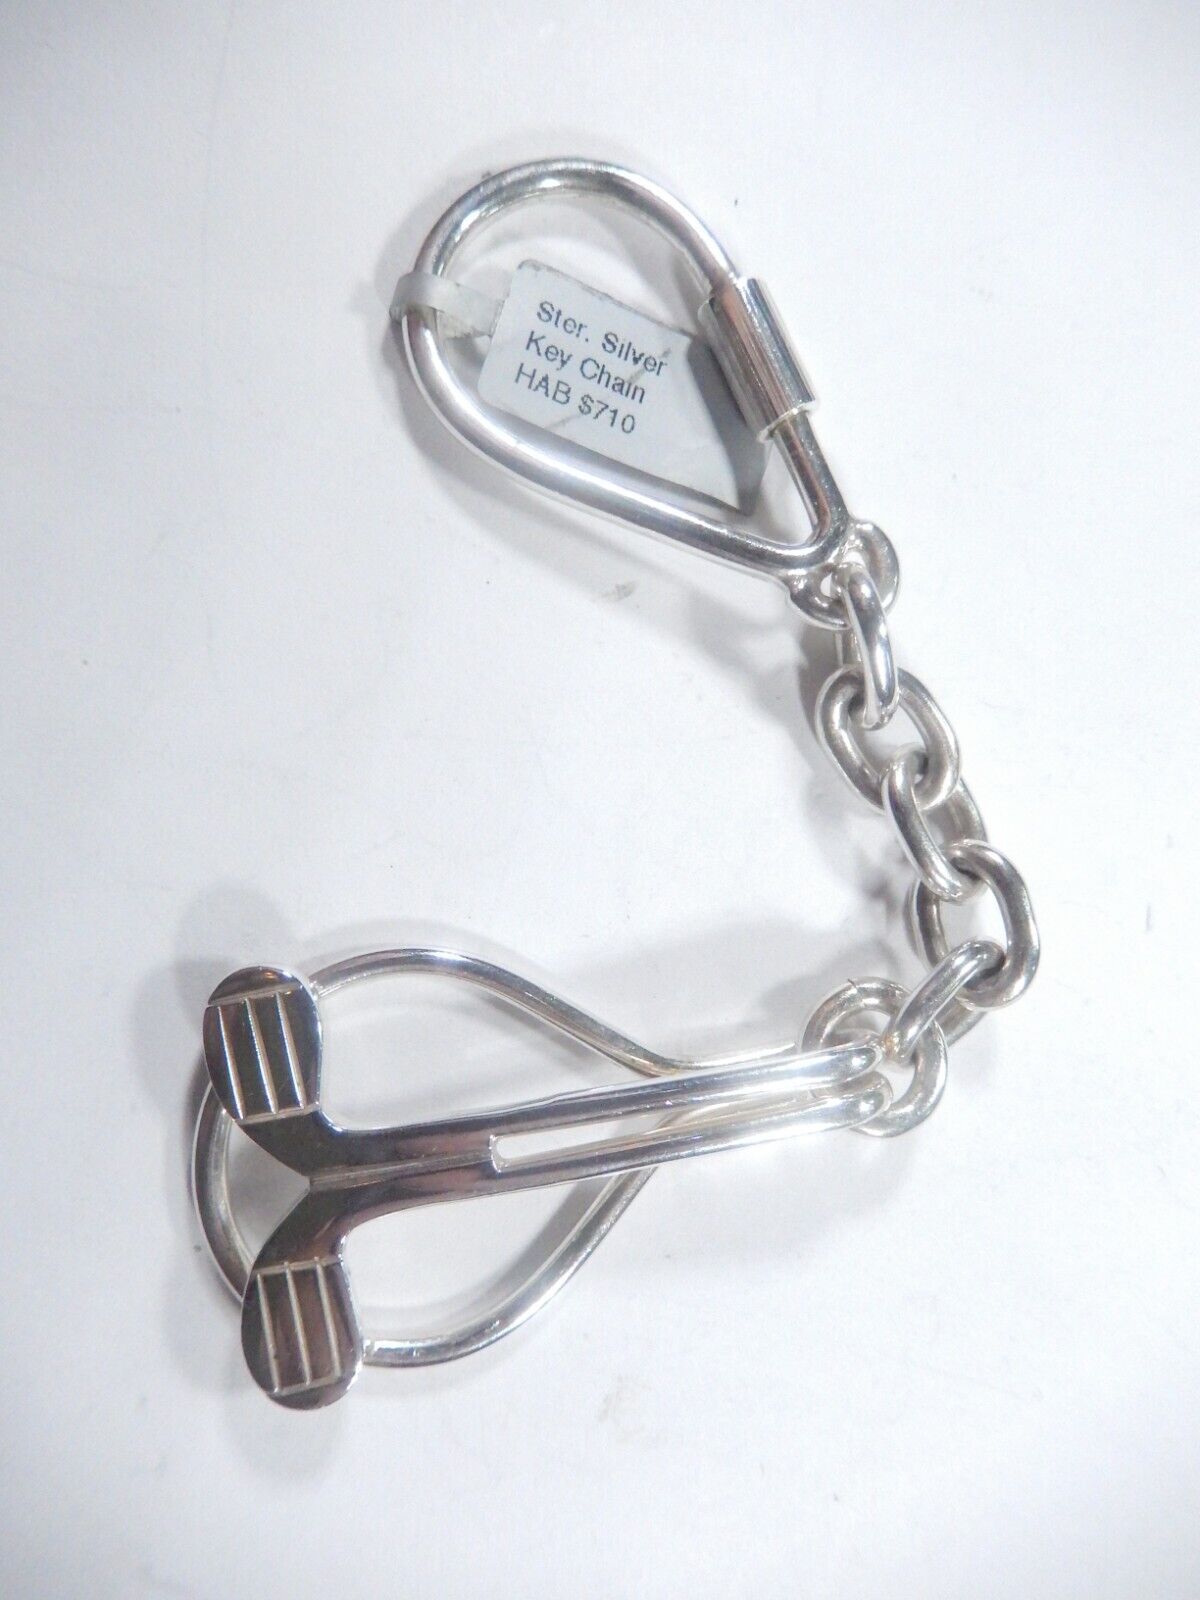 *VINTAGE* TAXCO  925 Sterling Silver Golf Money Clip Key Chain